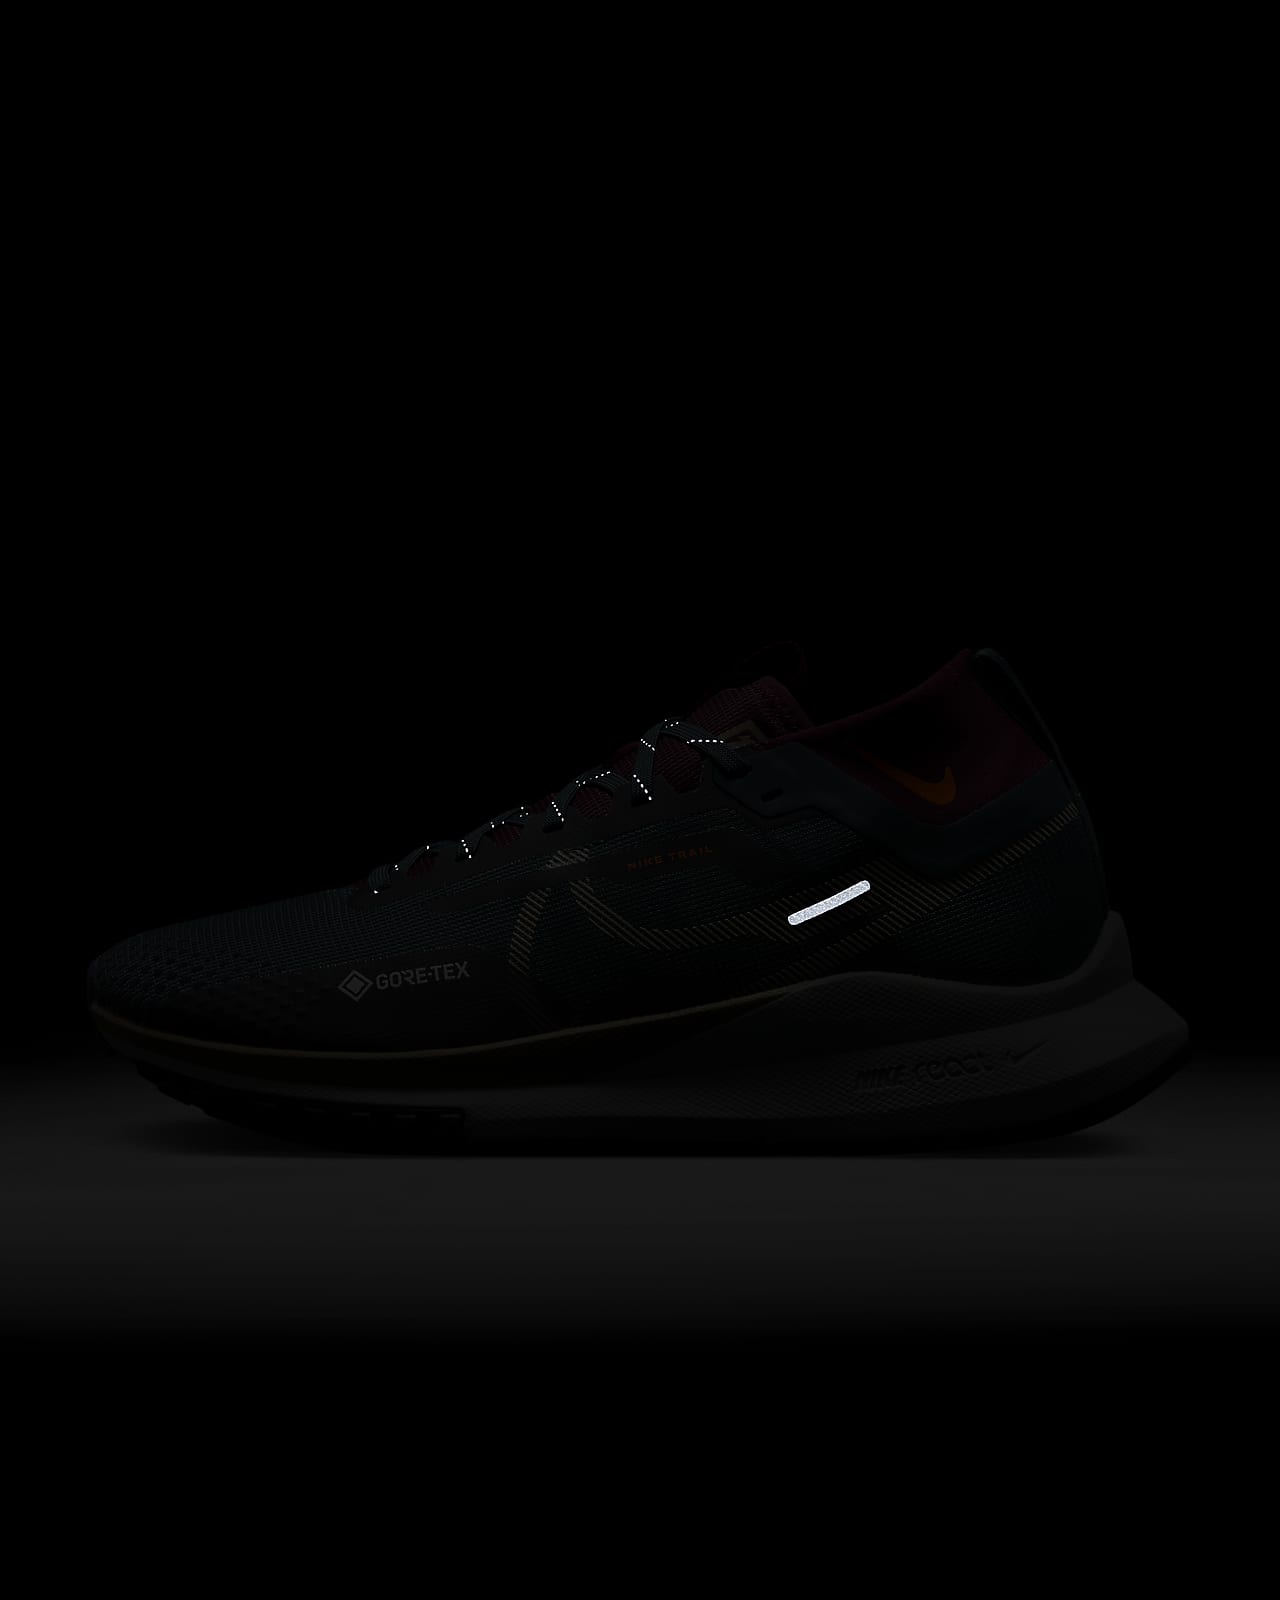 Nike Pegasus Trail 4 GORE-TEX By You Zapatillas de trail running  impermeables y personalizables. Nike ES